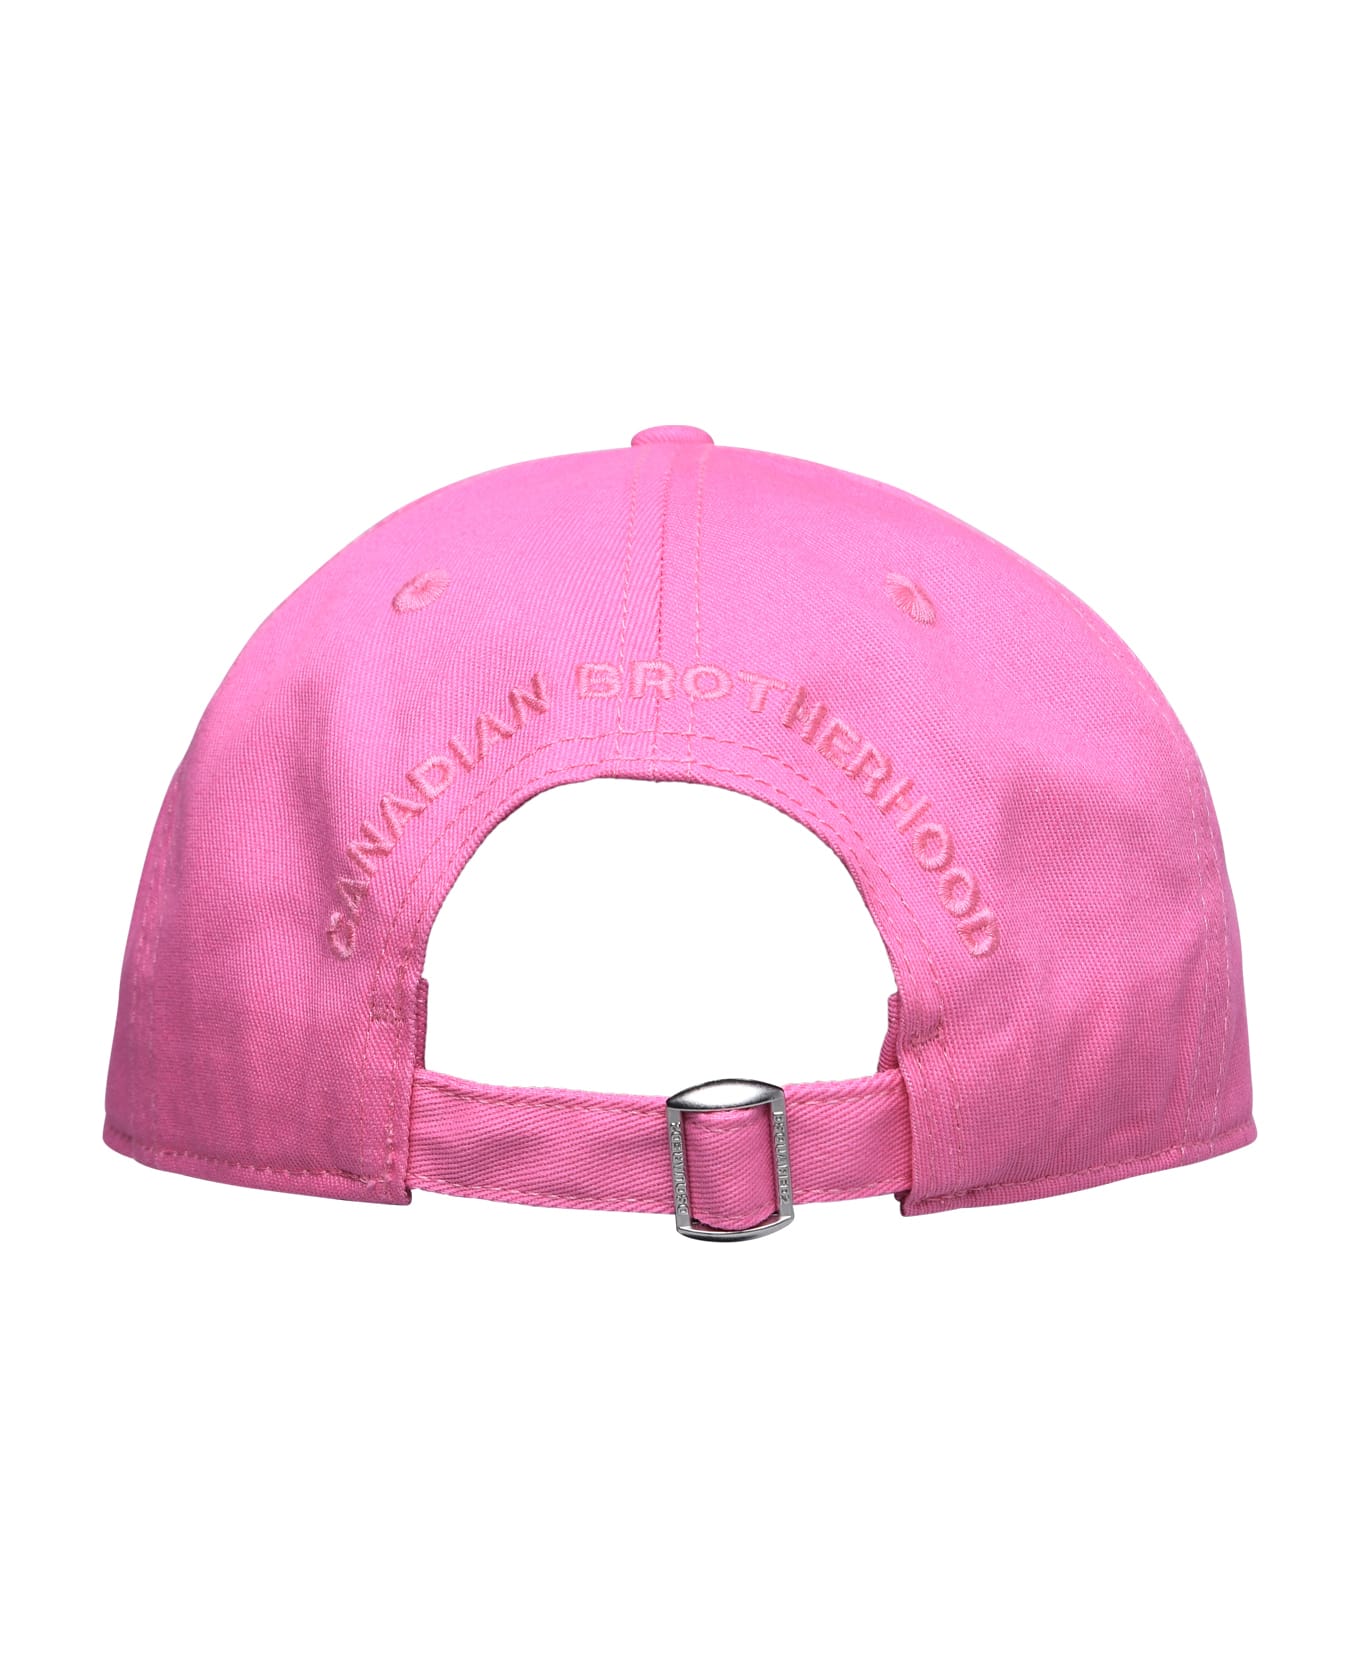 Dsquared2 Logo Embroidery Baseball Cap - Pink